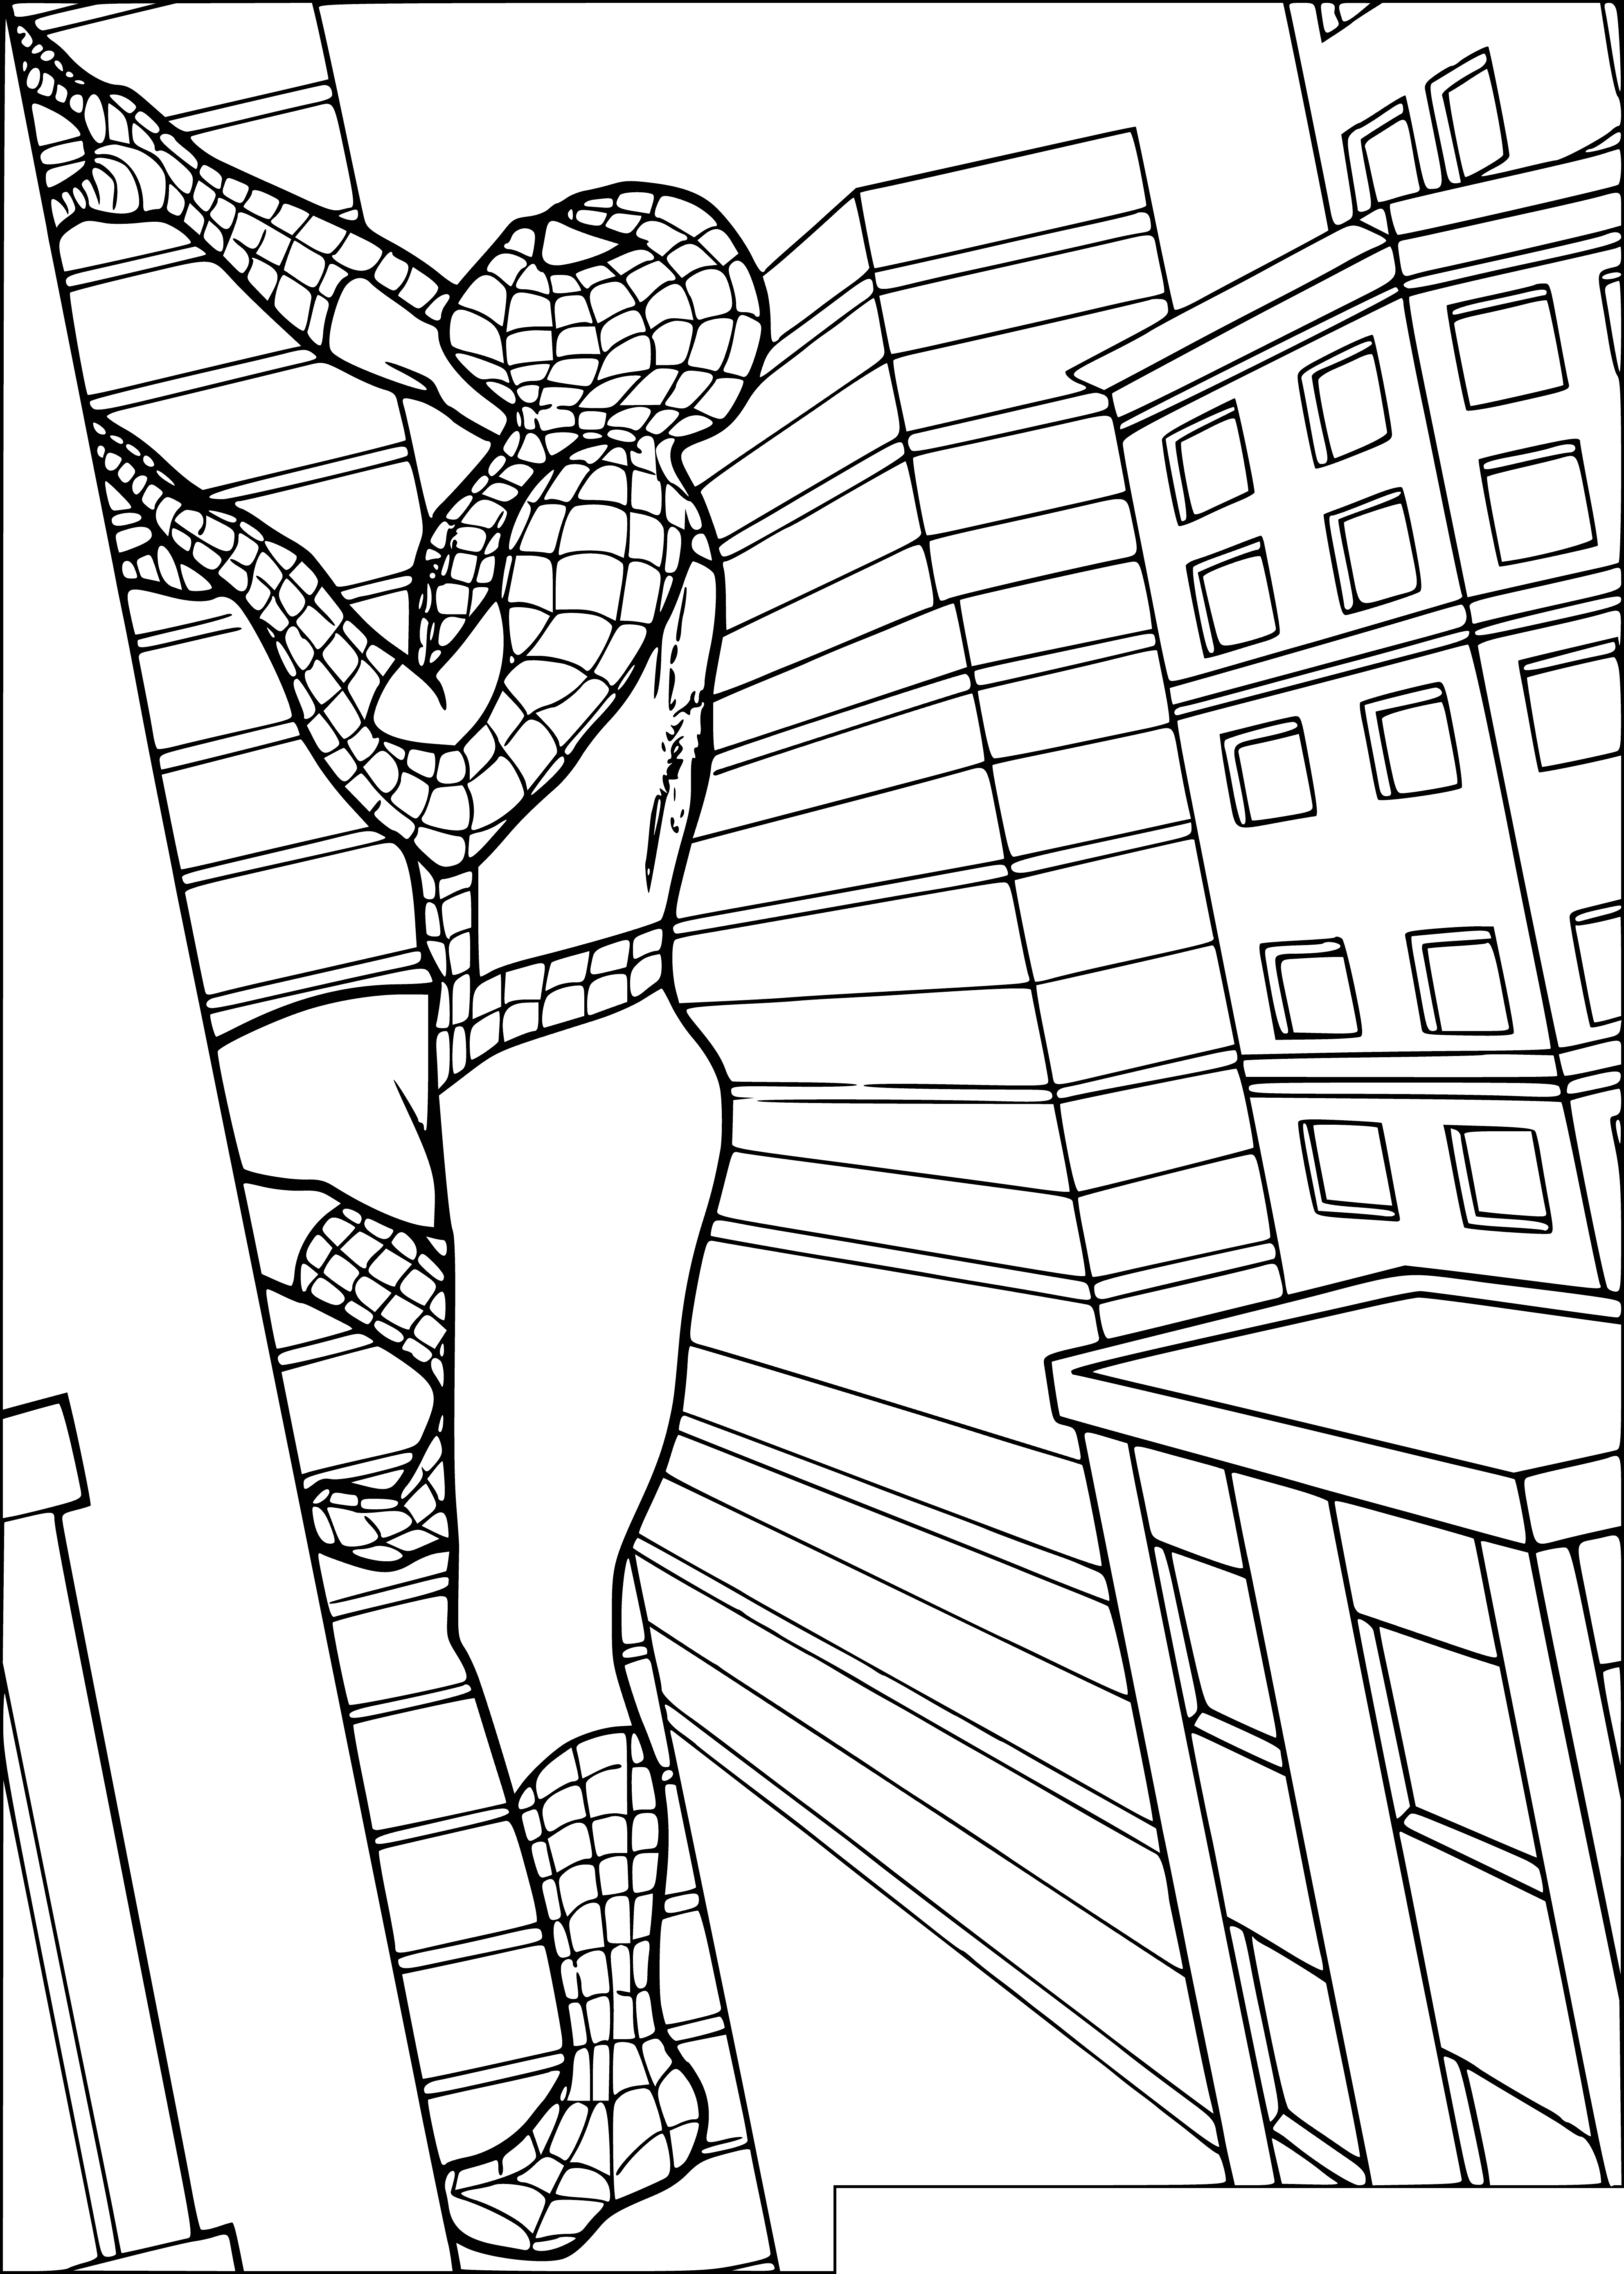 coloring page: Spider-Man stands on a building in his iconic red and blue suit with a black spider on the chest and blue eyes behind a red mask. He has black gloves/boots and arms outstretched. #Spiderman #coloringpage